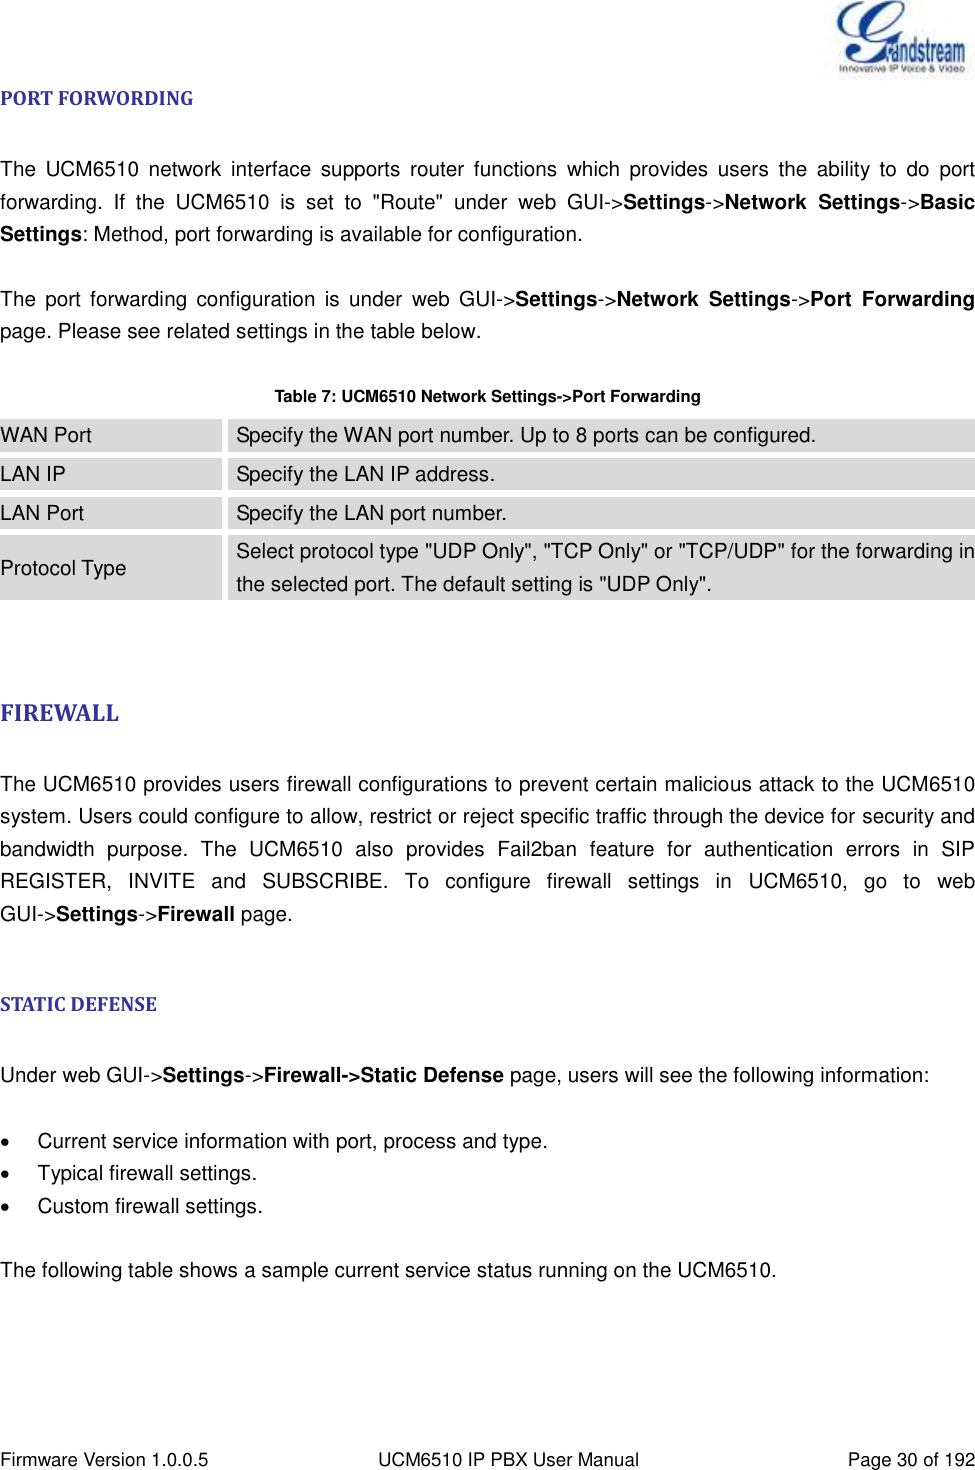  Firmware Version 1.0.0.5 UCM6510 IP PBX User Manual Page 30 of 192  PORT FORWORDING  The  UCM6510  network  interface  supports  router  functions  which  provides  users  the  ability  to  do  port forwarding.  If  the  UCM6510  is  set  to  &quot;Route&quot;  under  web  GUI-&gt;Settings-&gt;Network  Settings-&gt;Basic Settings: Method, port forwarding is available for configuration.  The  port  forwarding  configuration  is  under  web  GUI-&gt;Settings-&gt;Network  Settings-&gt;Port  Forwarding page. Please see related settings in the table below.  Table 7: UCM6510 Network Settings-&gt;Port Forwarding WAN Port Specify the WAN port number. Up to 8 ports can be configured. LAN IP Specify the LAN IP address. LAN Port Specify the LAN port number. Protocol Type Select protocol type &quot;UDP Only&quot;, &quot;TCP Only&quot; or &quot;TCP/UDP&quot; for the forwarding in the selected port. The default setting is &quot;UDP Only&quot;.   FIREWALL  The UCM6510 provides users firewall configurations to prevent certain malicious attack to the UCM6510 system. Users could configure to allow, restrict or reject specific traffic through the device for security and bandwidth  purpose.  The  UCM6510  also  provides  Fail2ban  feature  for  authentication  errors  in  SIP REGISTER,  INVITE  and  SUBSCRIBE.  To  configure  firewall  settings  in  UCM6510,  go  to  web GUI-&gt;Settings-&gt;Firewall page.  STATIC DEFENSE  Under web GUI-&gt;Settings-&gt;Firewall-&gt;Static Defense page, users will see the following information:    Current service information with port, process and type.   Typical firewall settings.   Custom firewall settings.  The following table shows a sample current service status running on the UCM6510.     